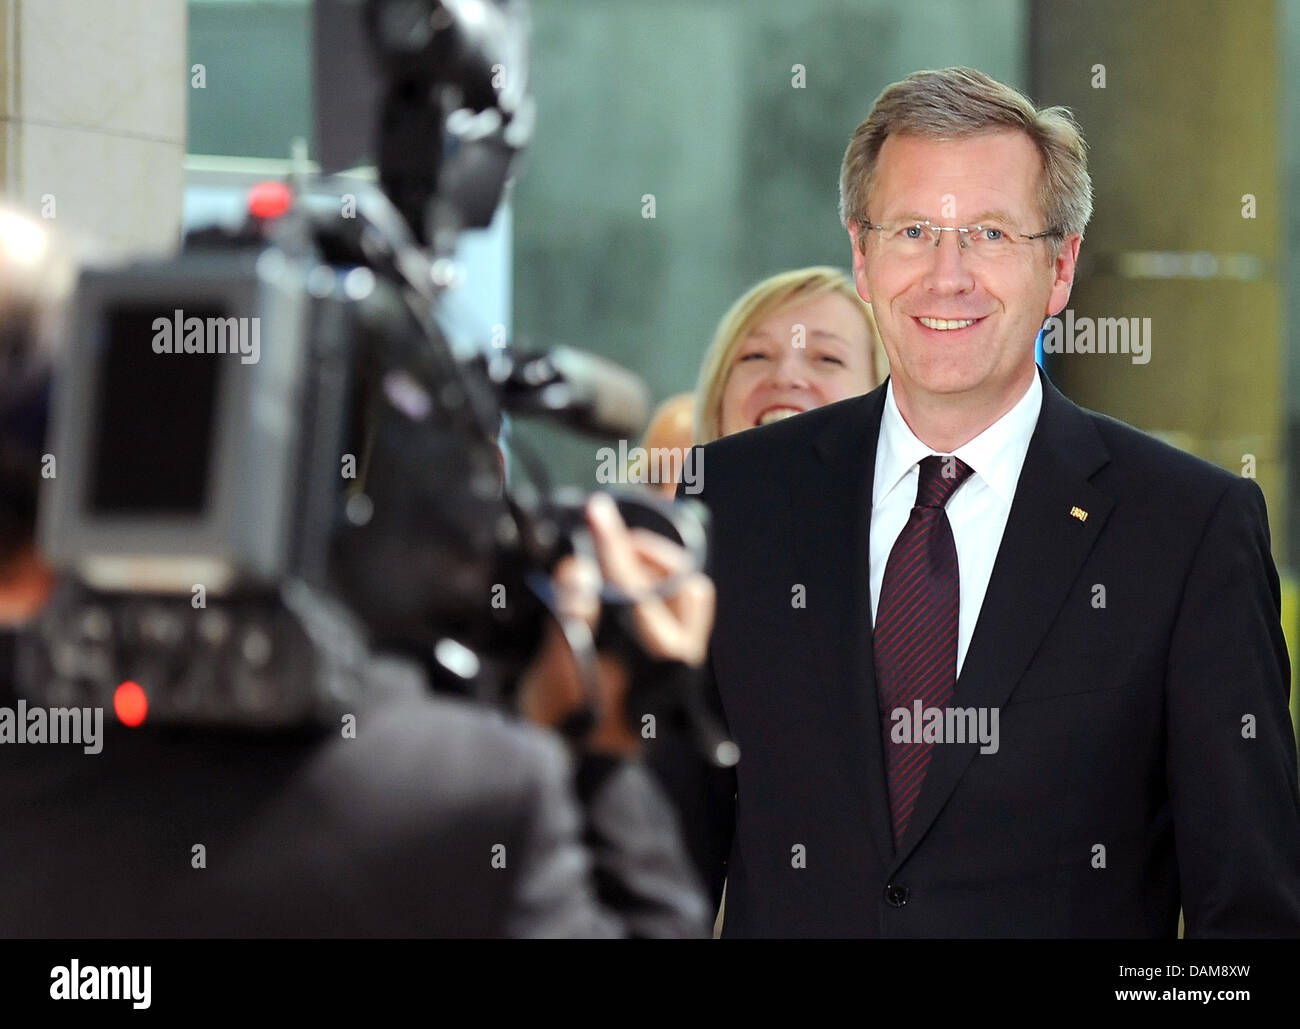 German President Christian Wulff  attends the award ceremony for the Amnesty Amnesty International Human Rights Award at Haus der Kulturen der Welt in Berlin, Germany, 27 May 2011. Abel Barrera Hernandez, founder of Mexican human rights organization Tlachinollan has been awarded the Amnesty  International Human Rights Award for his work on human rights and justice issues for the in Stock Photo